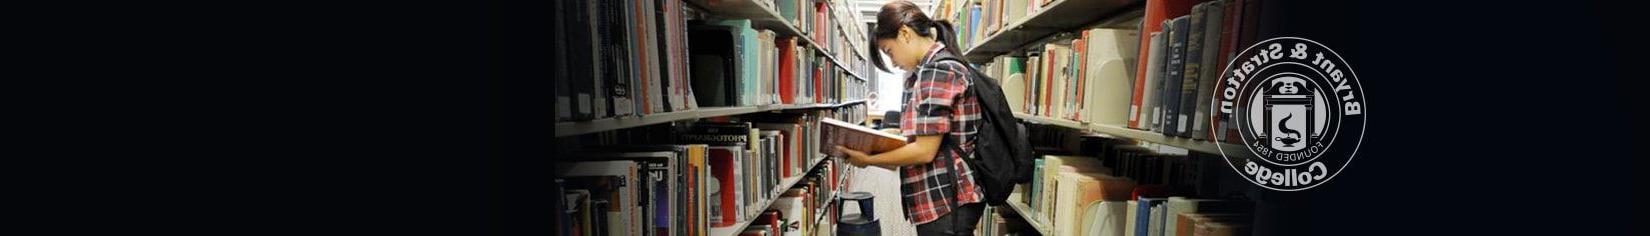 Student in library searching for books